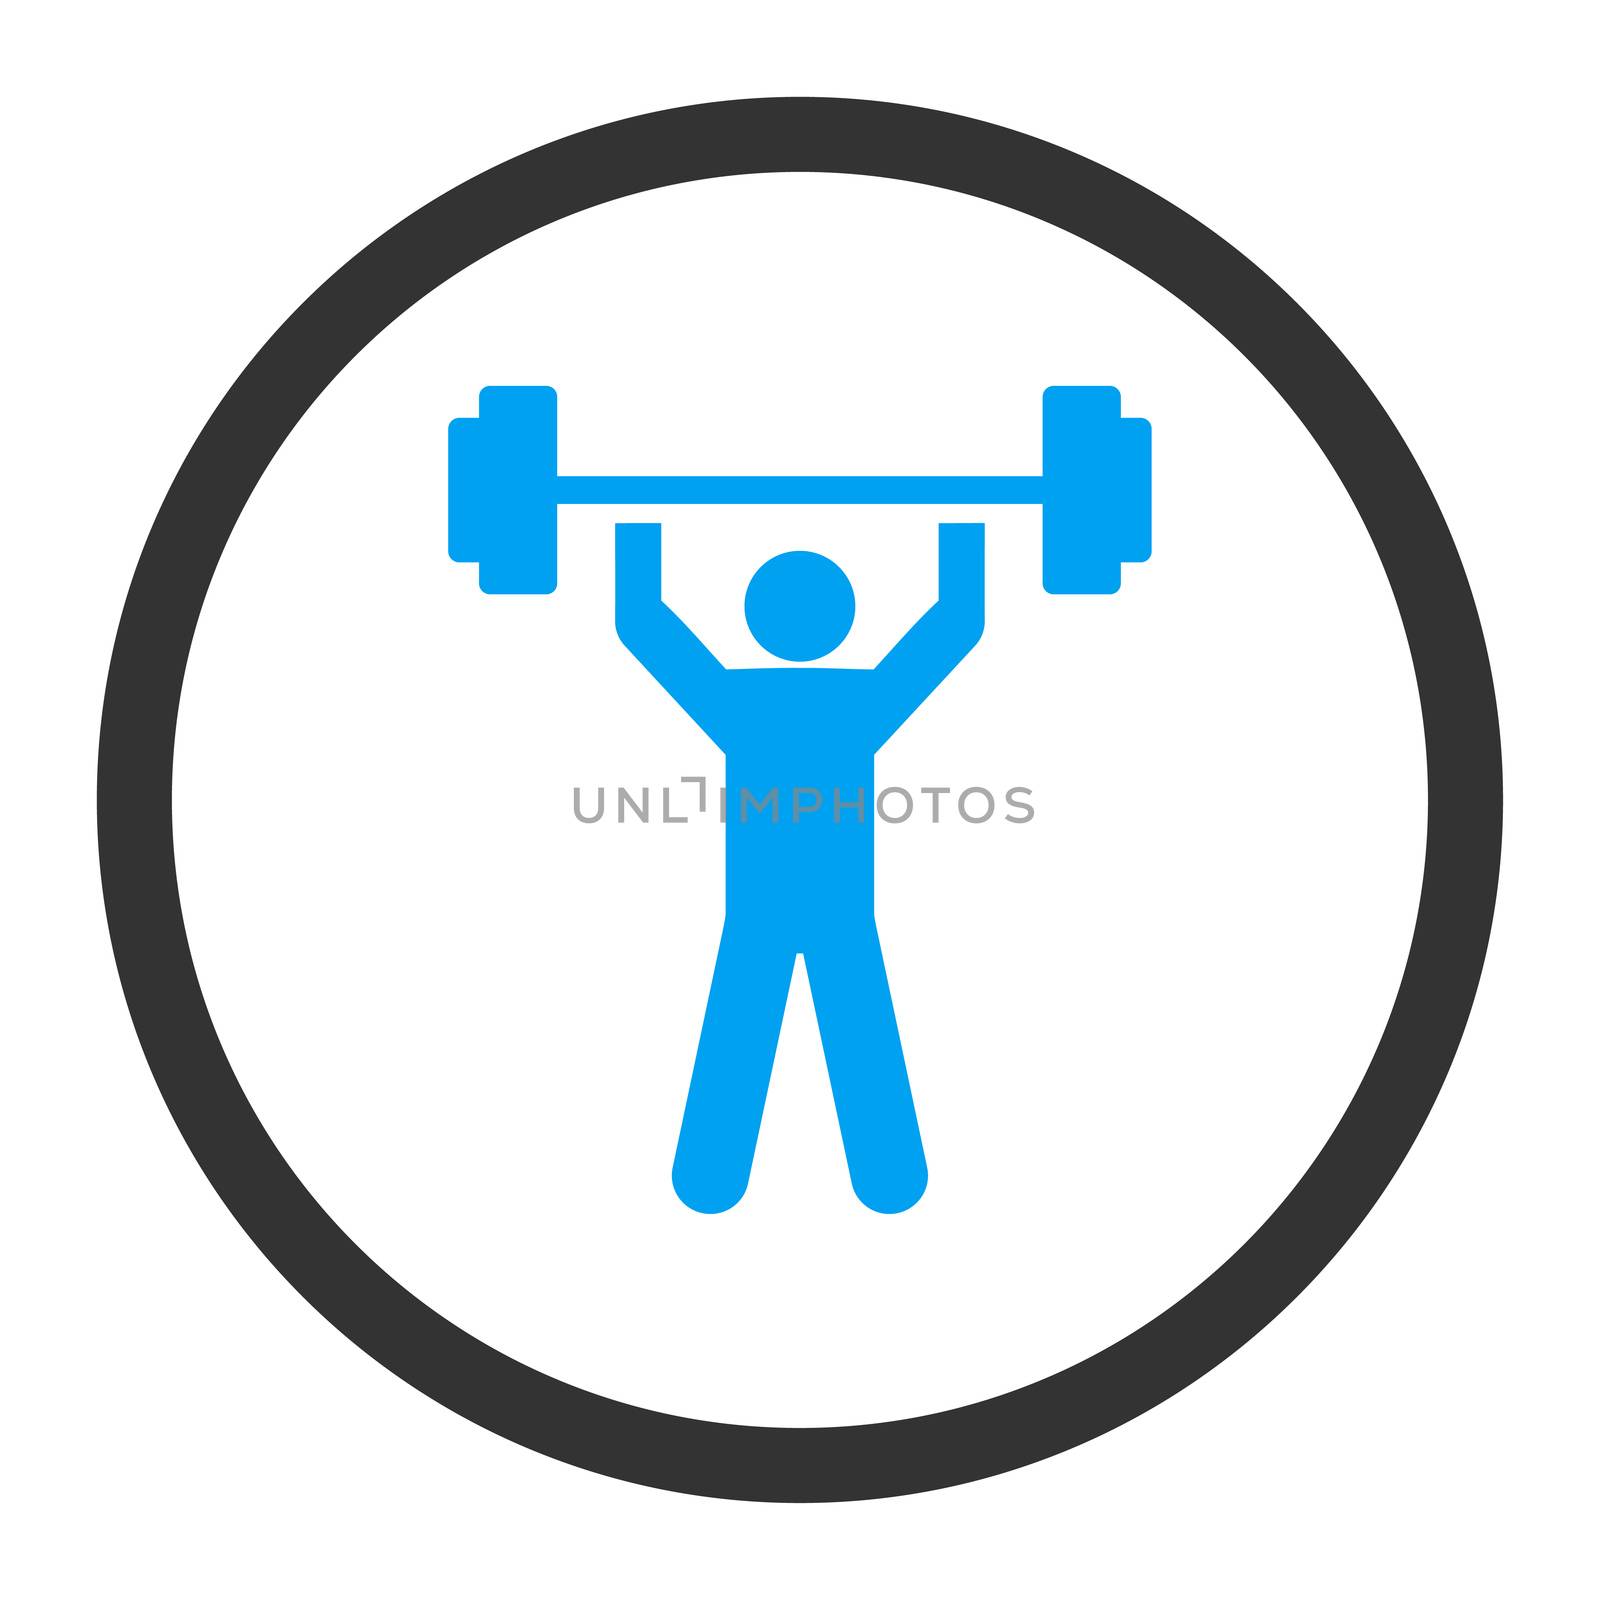 Power lifting glyph icon. This rounded flat symbol is drawn with blue and gray colors on a white background.